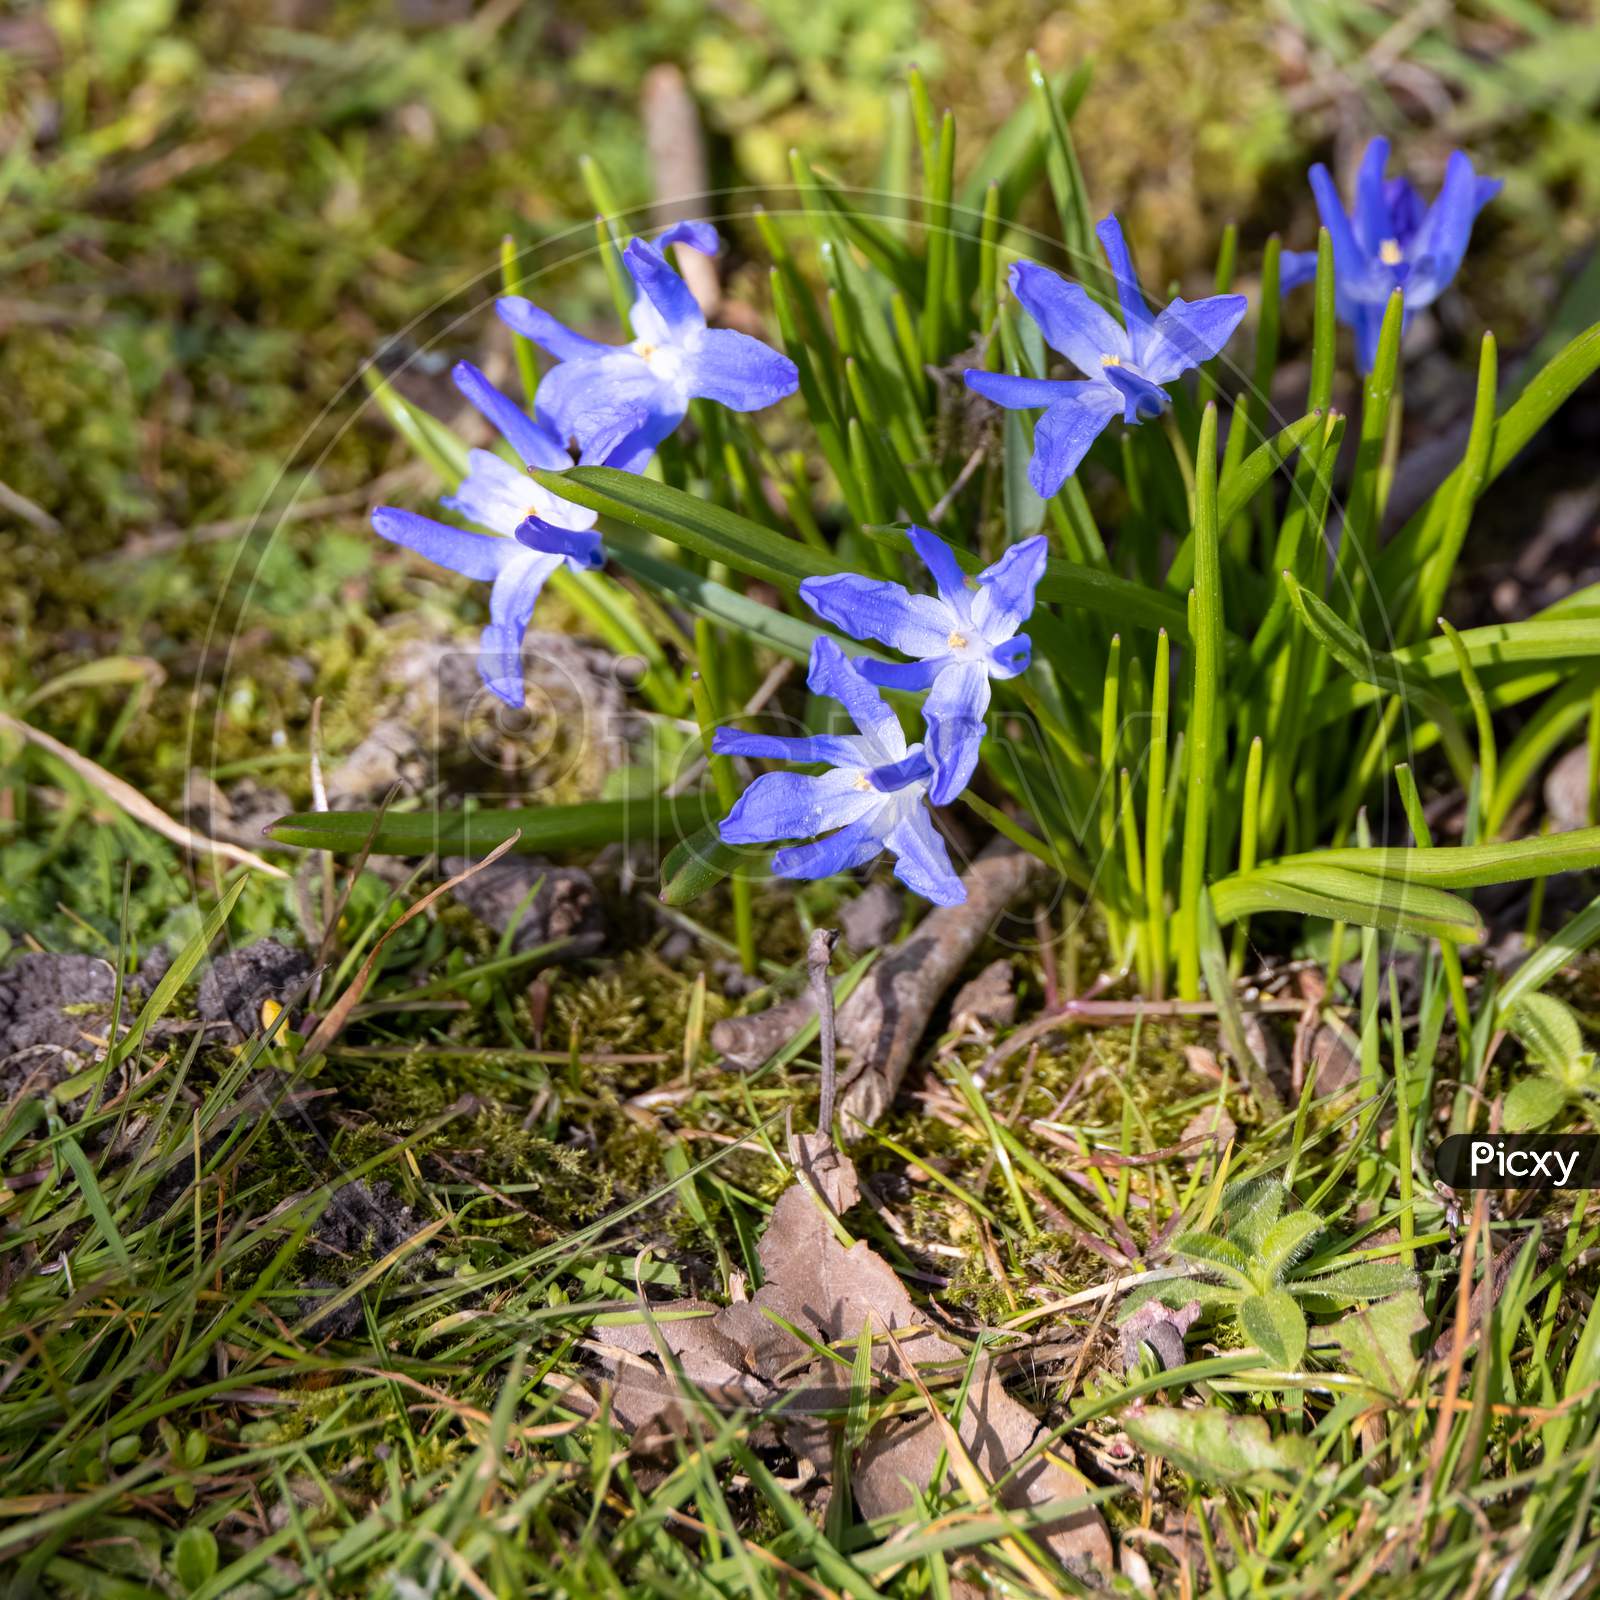 Glory-Of-The-Snow (Scilla Luciliae) Flowering In The Spring Sunshine